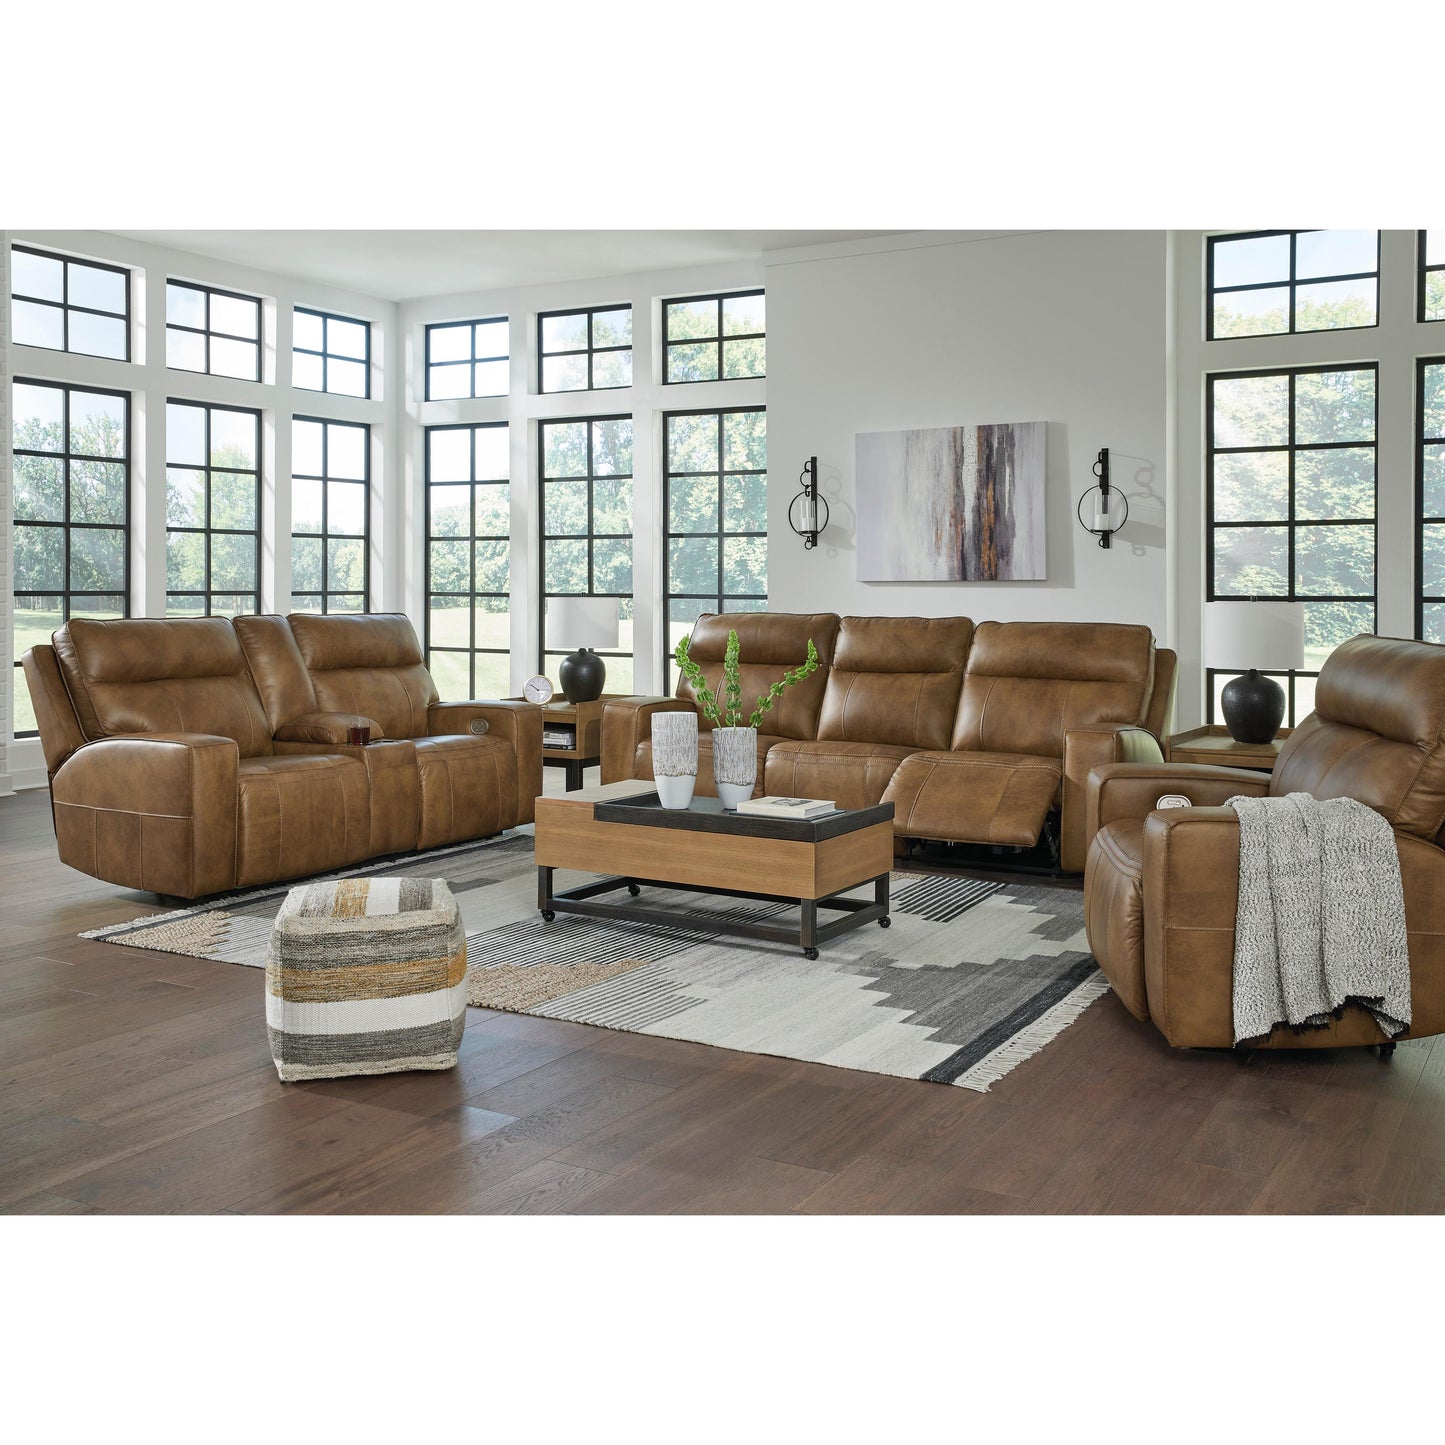 Signature Design by Ashley Game Plan Power Leather Recliner U1520682 IMAGE 8